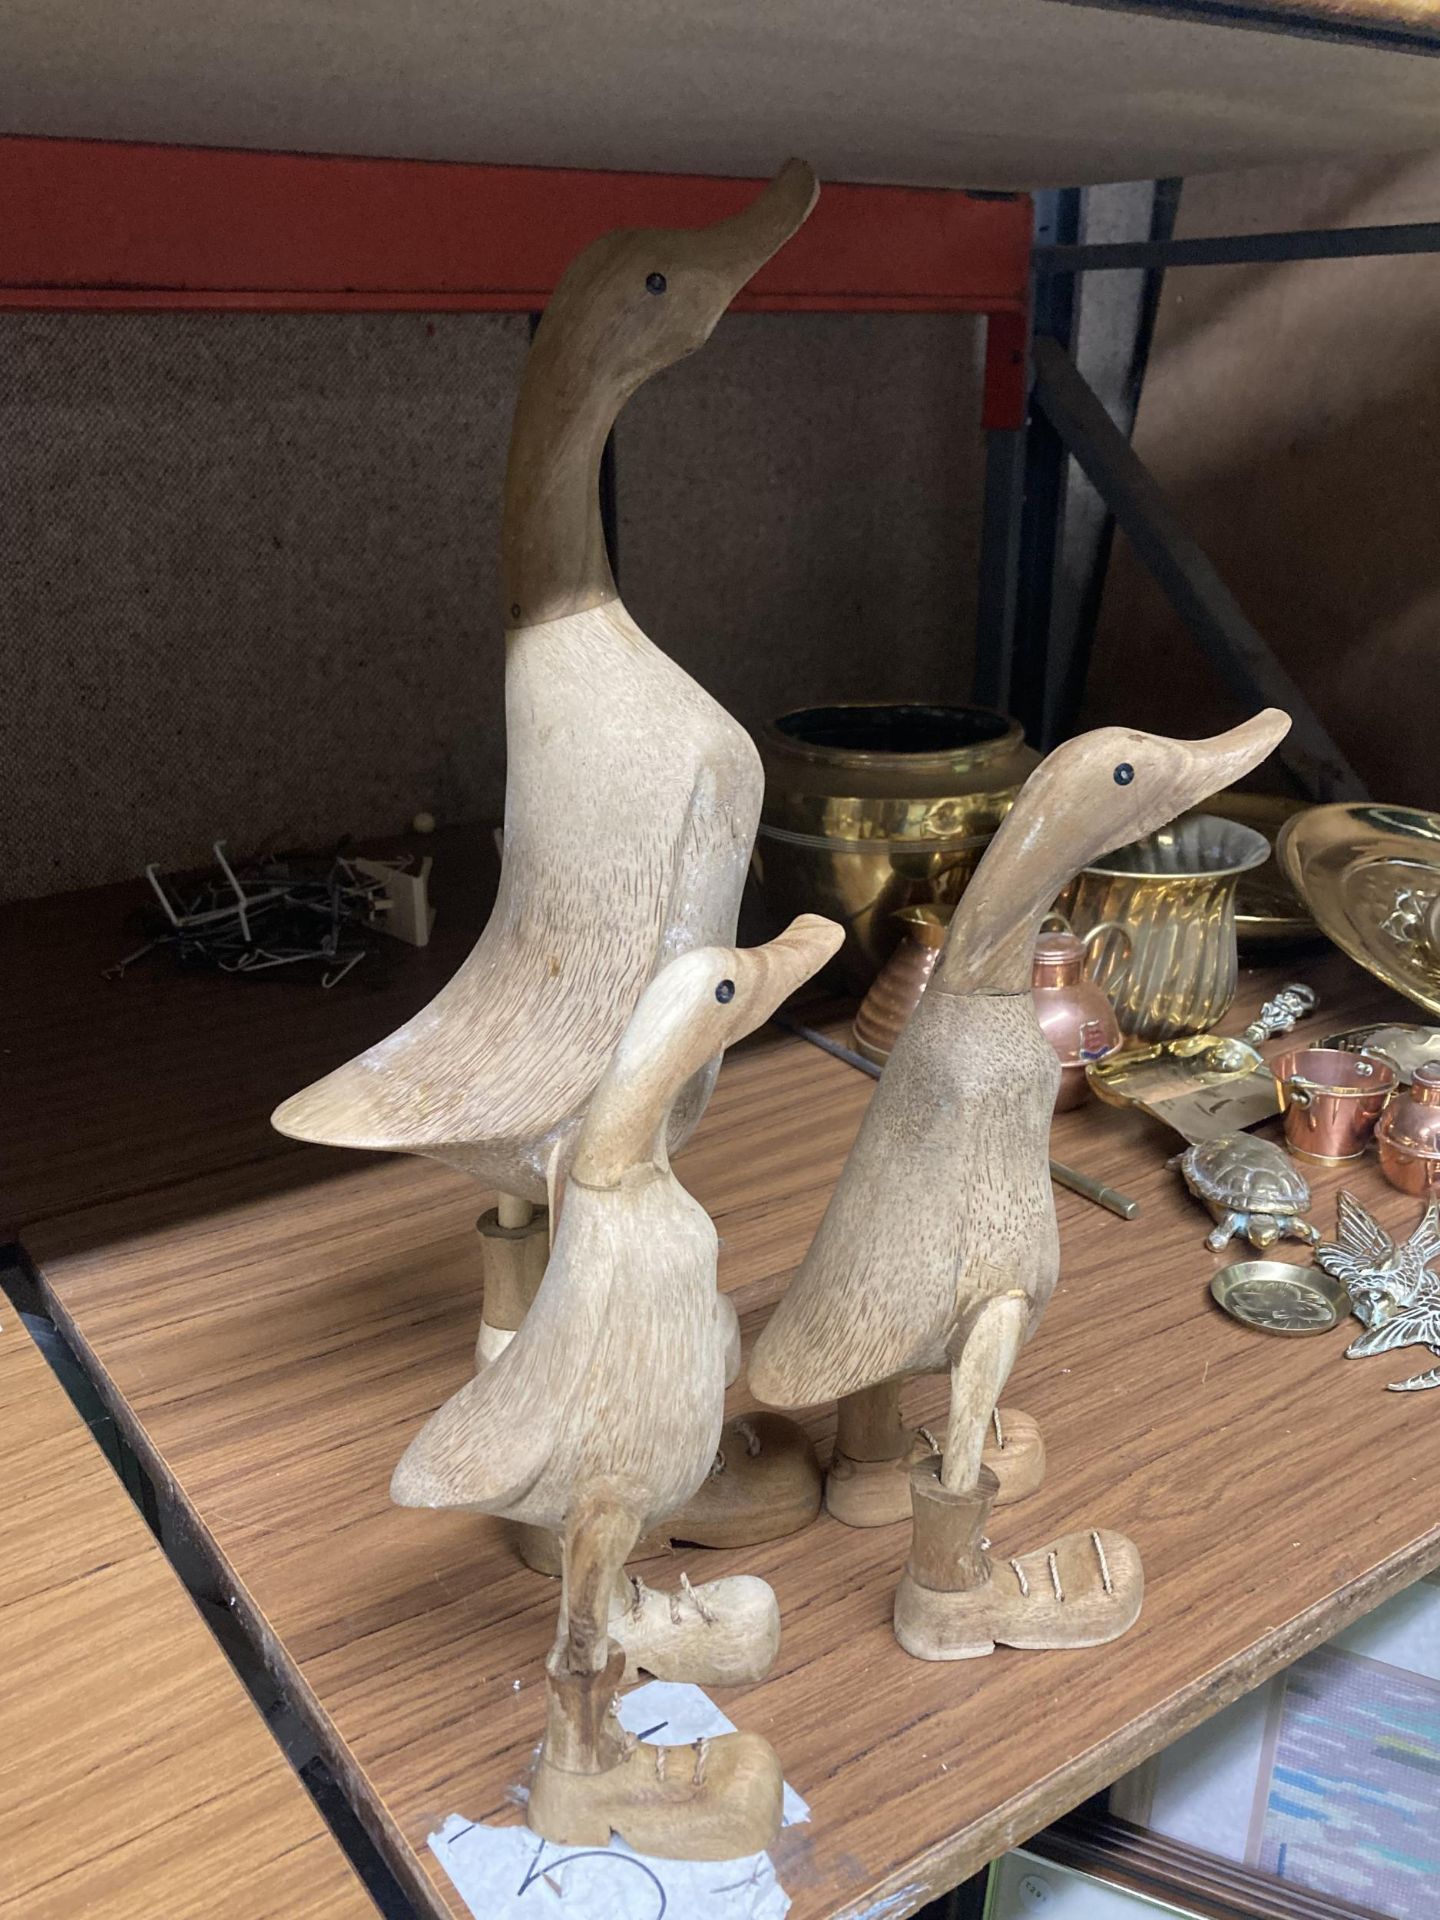 A GROUP OF THREE WOODEN DUCK FIGURES - Image 5 of 5